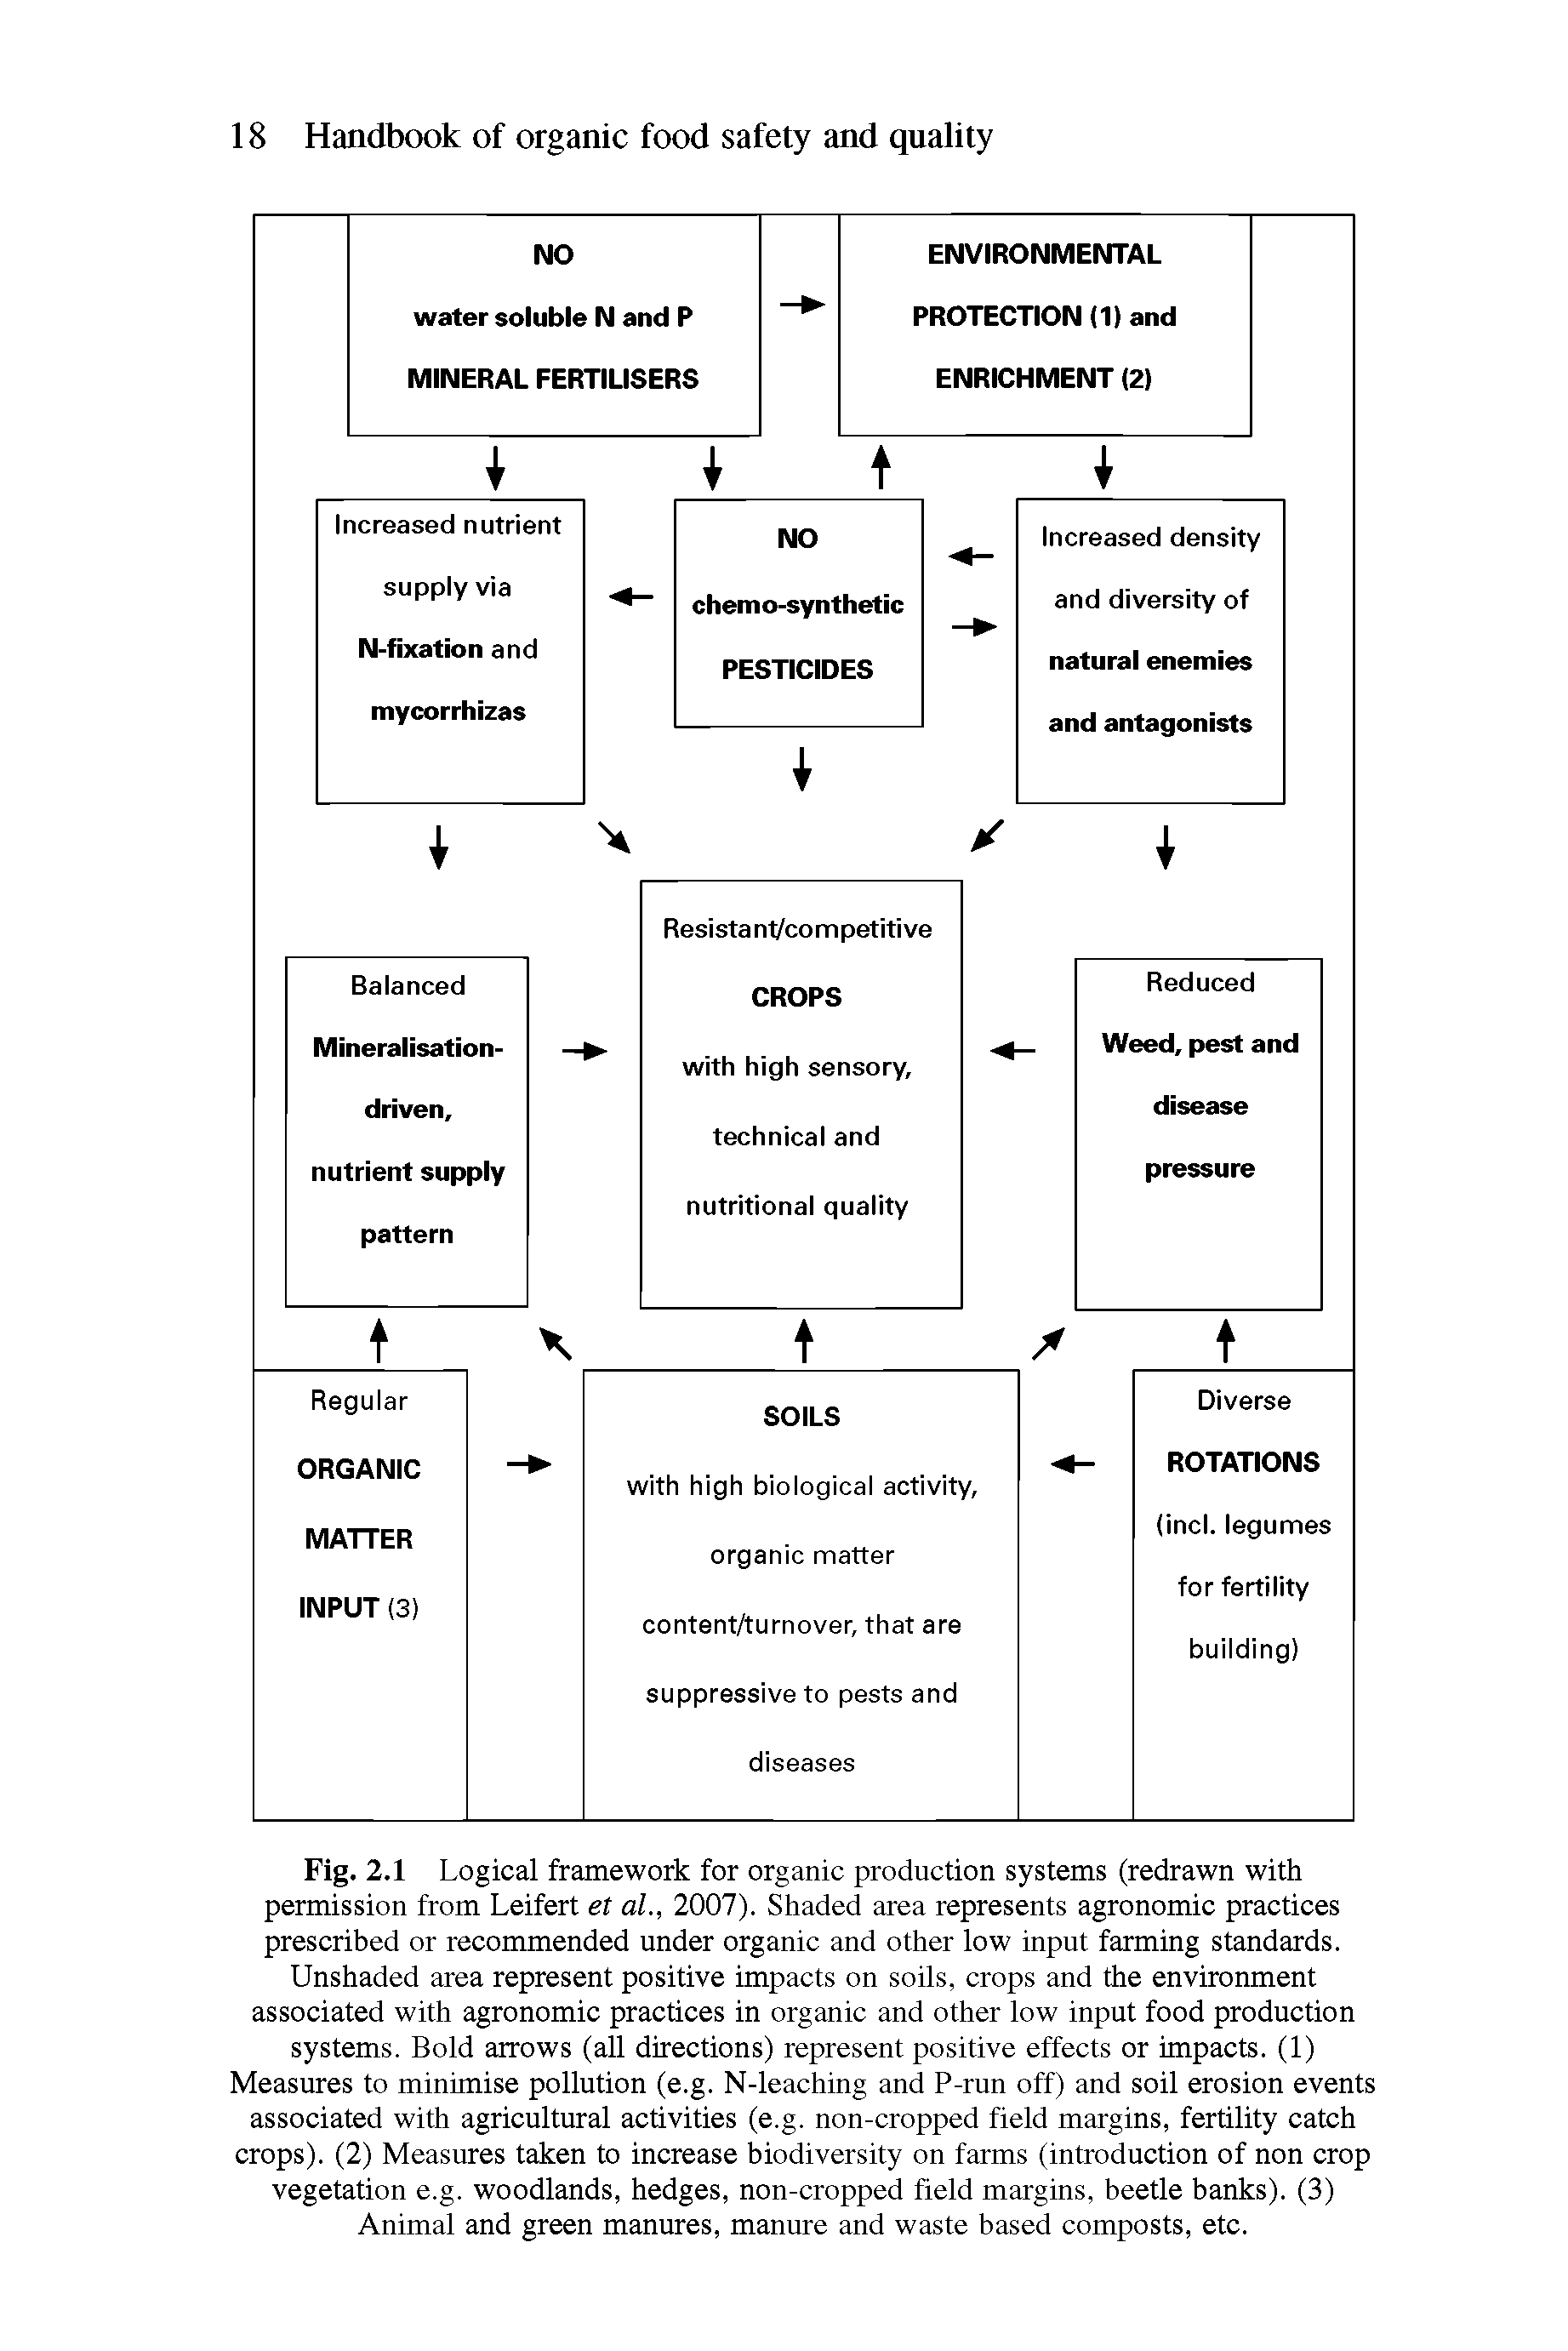 Fig. 2.1 Logical framework for organic production systems (redrawn with permission from Leifert et al., 2007). Shaded area represents agronomic practices prescribed or recommended under organic and other low input farming standards.